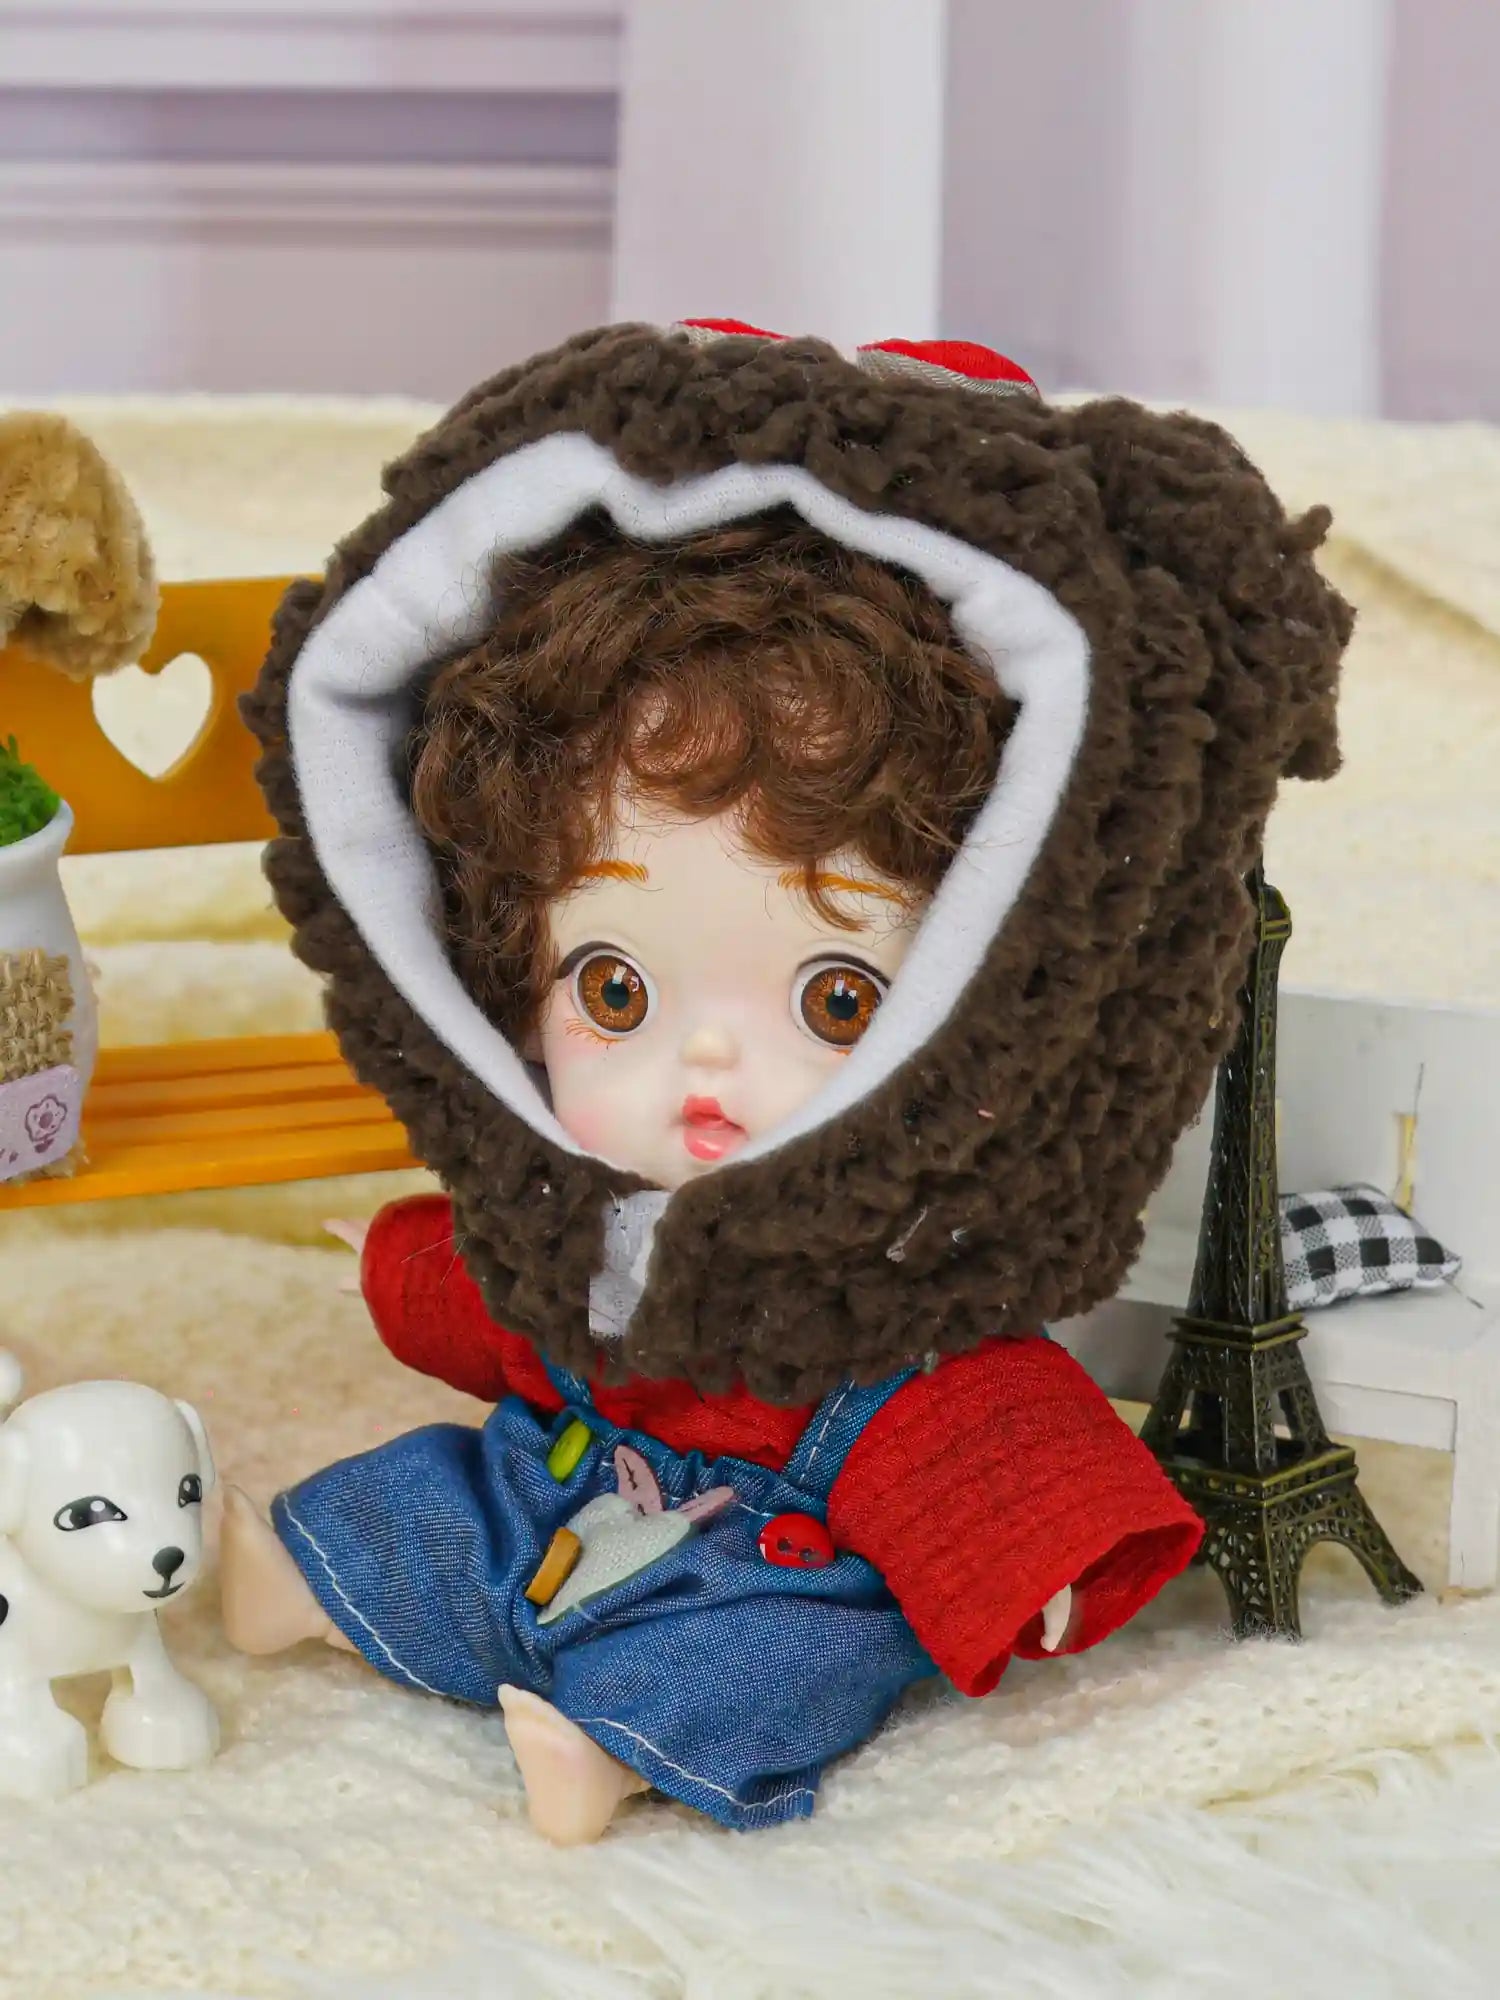 An adorable doll in a bear costume with a whimsical backdrop including a toy Eiffel Tower and playful puppy figure.